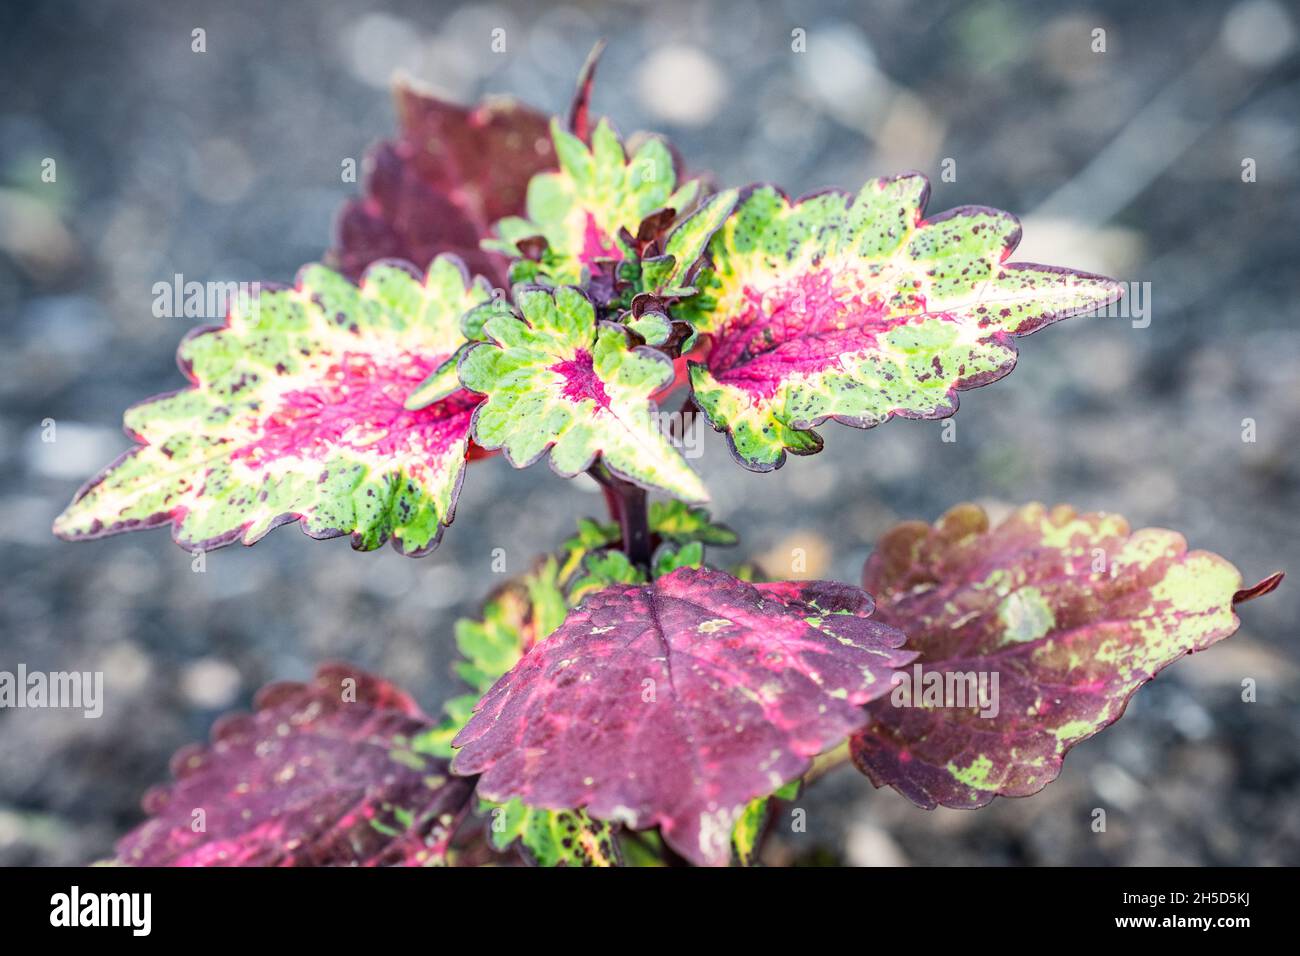 Caladium Plant in Texas with Various Colors in a Flower Bed Stock Photo